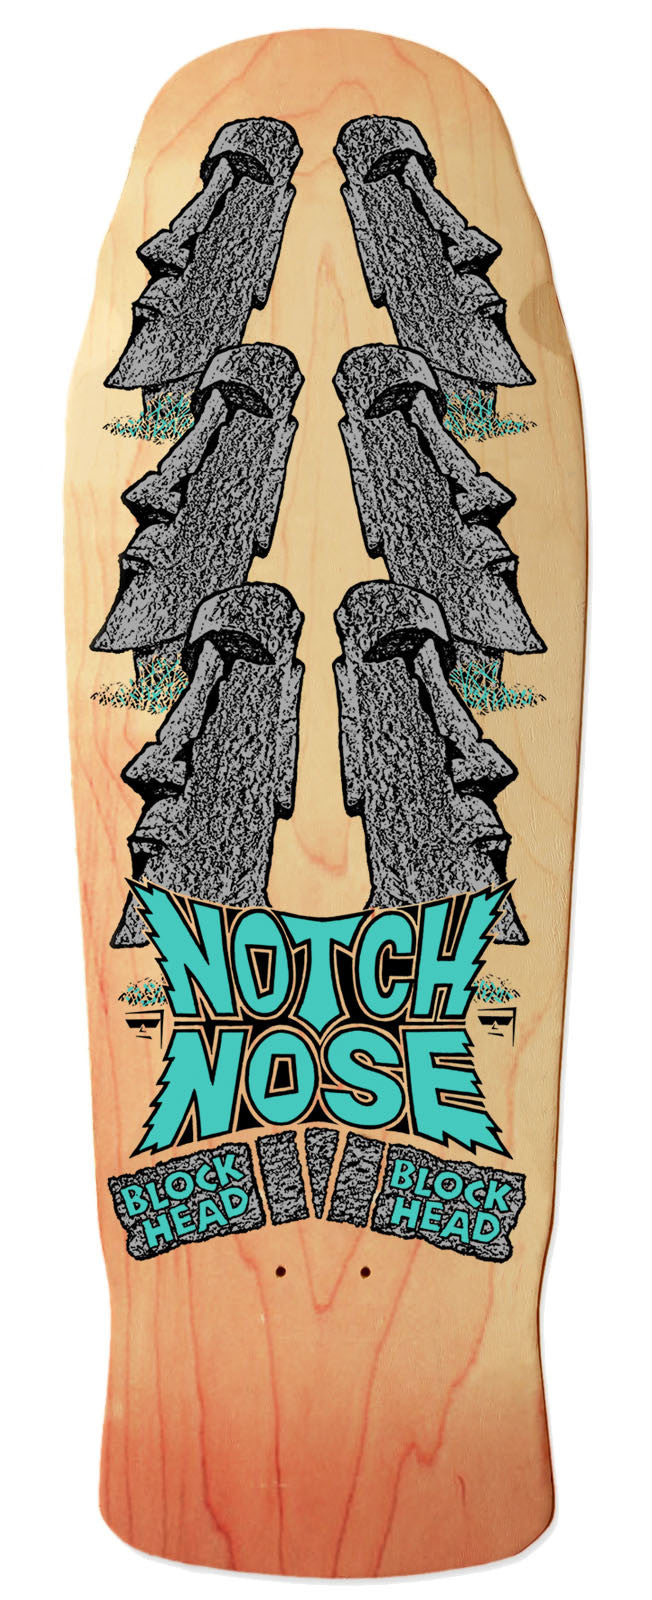 Notch Nose - SOLD OUT